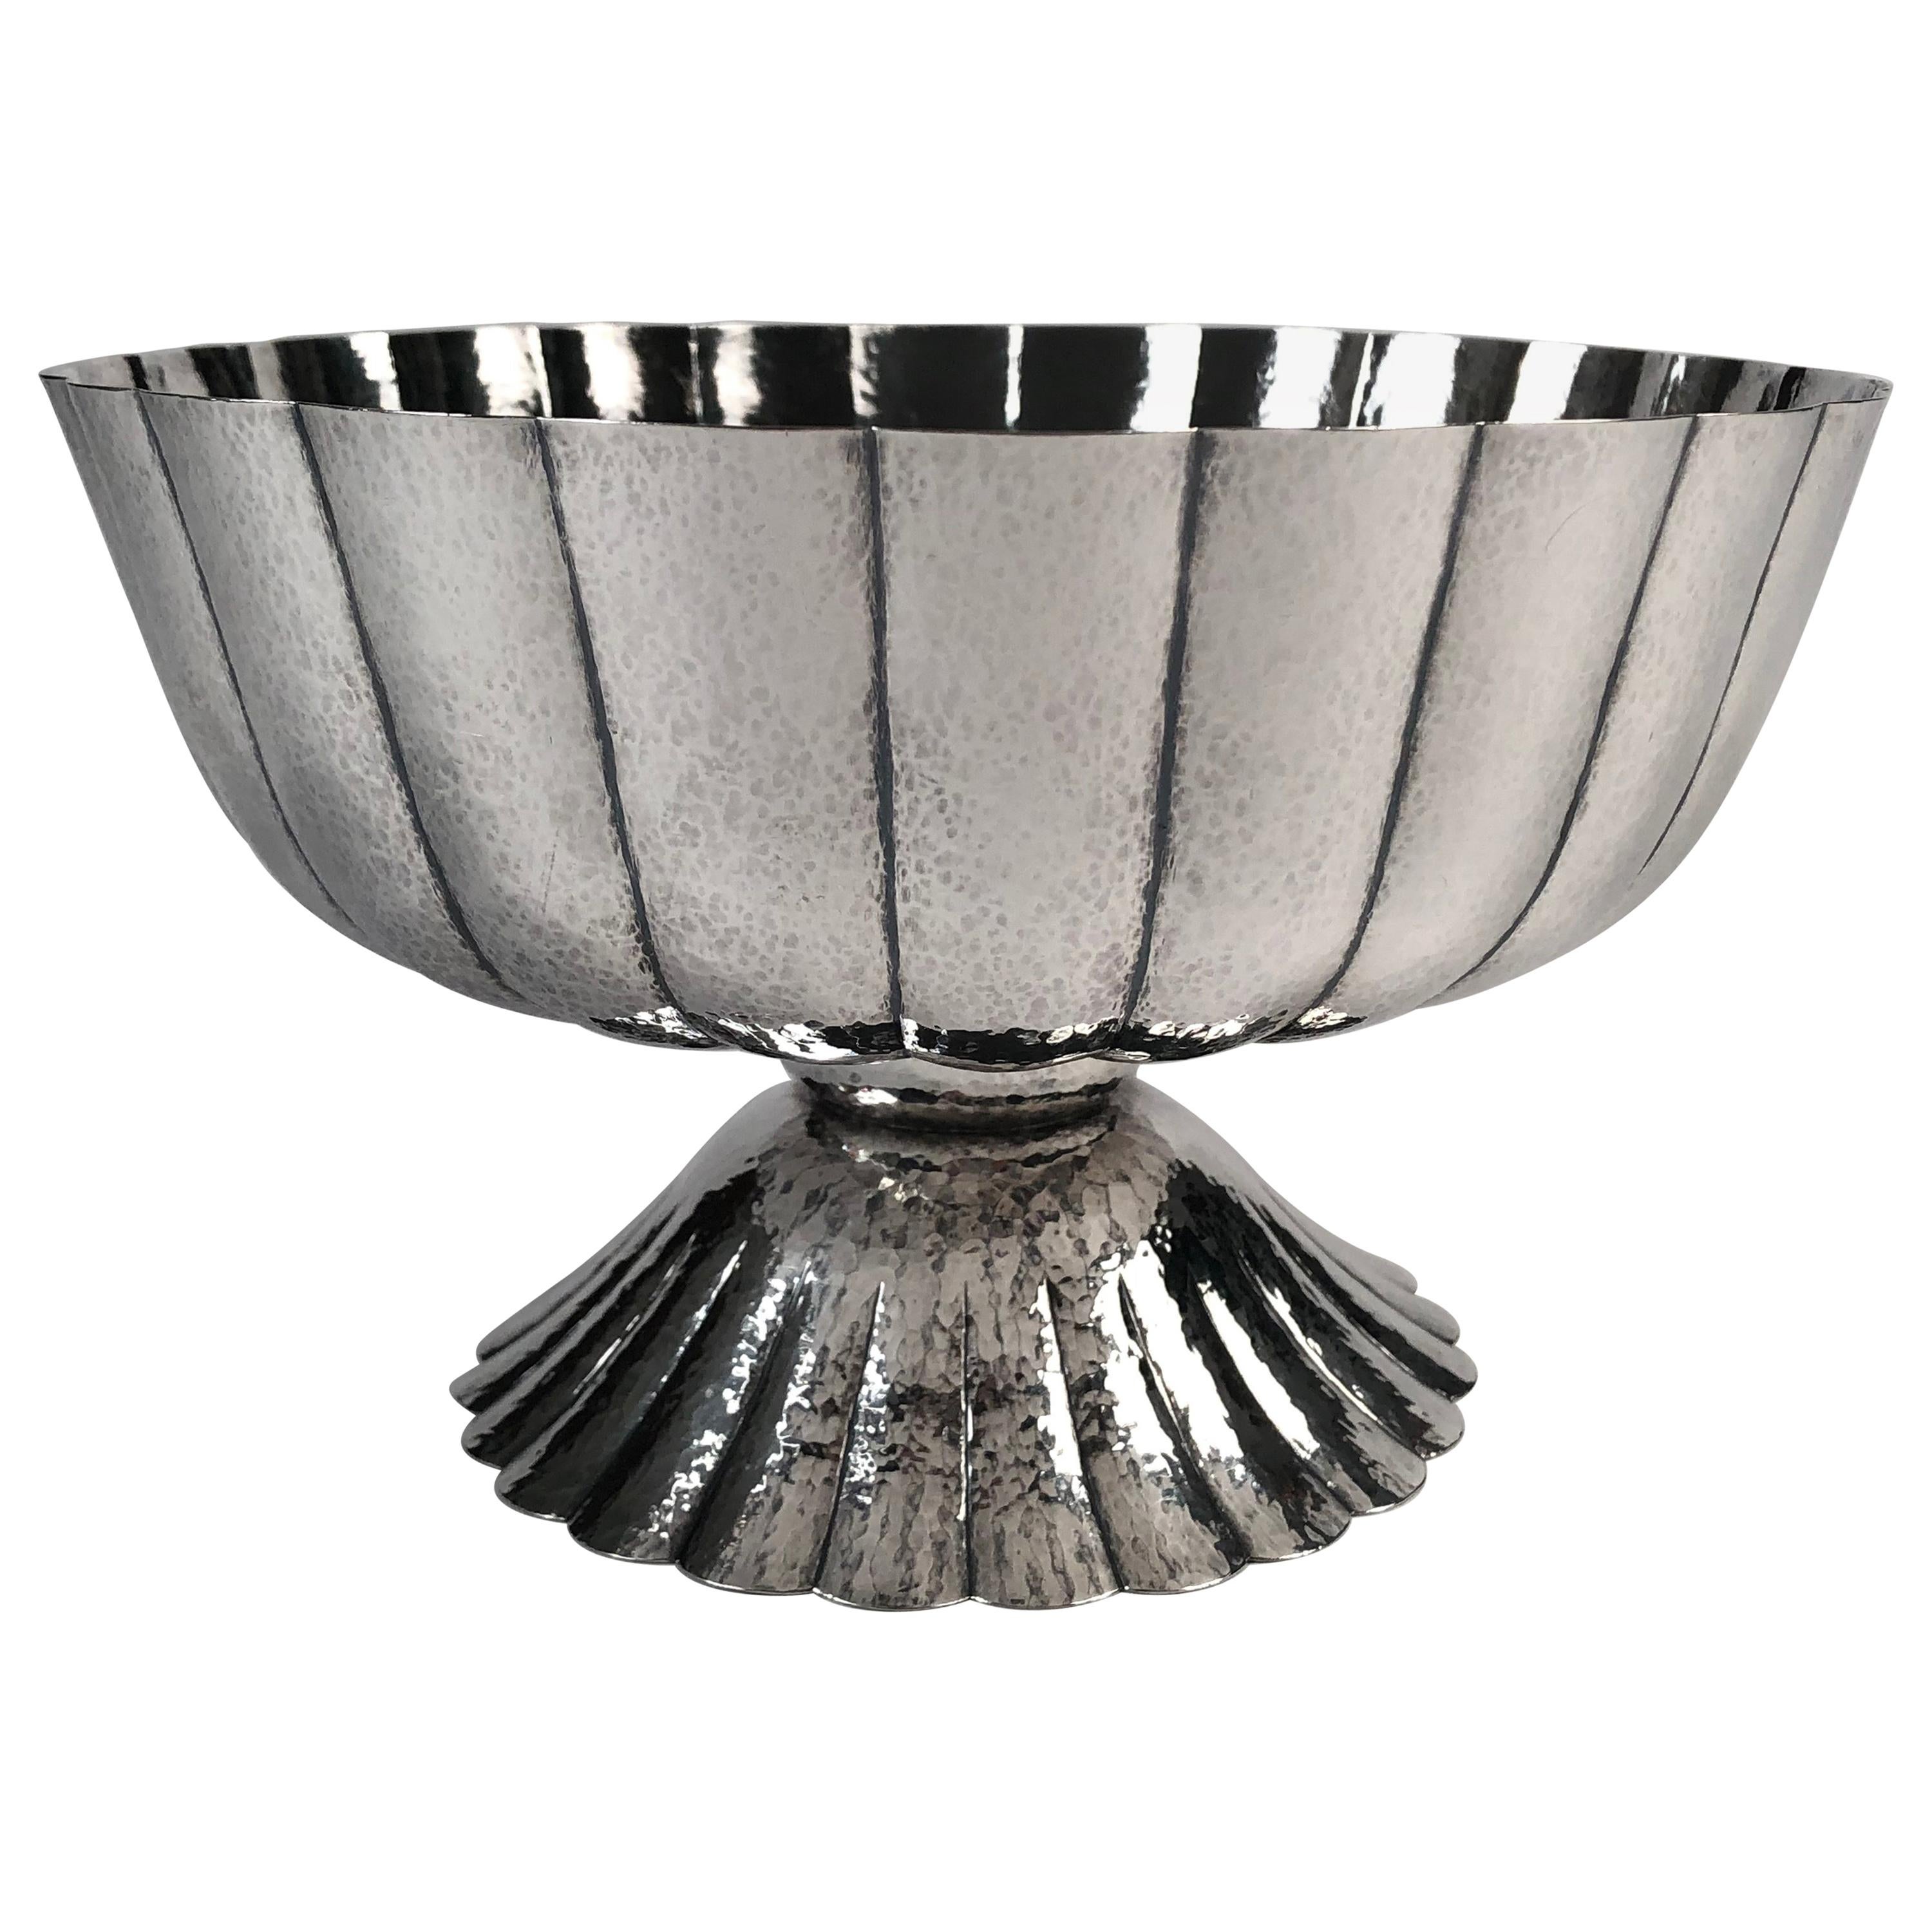 Viennese Secessionist Silver Footed Bowl after a Josef Hoffmann Design